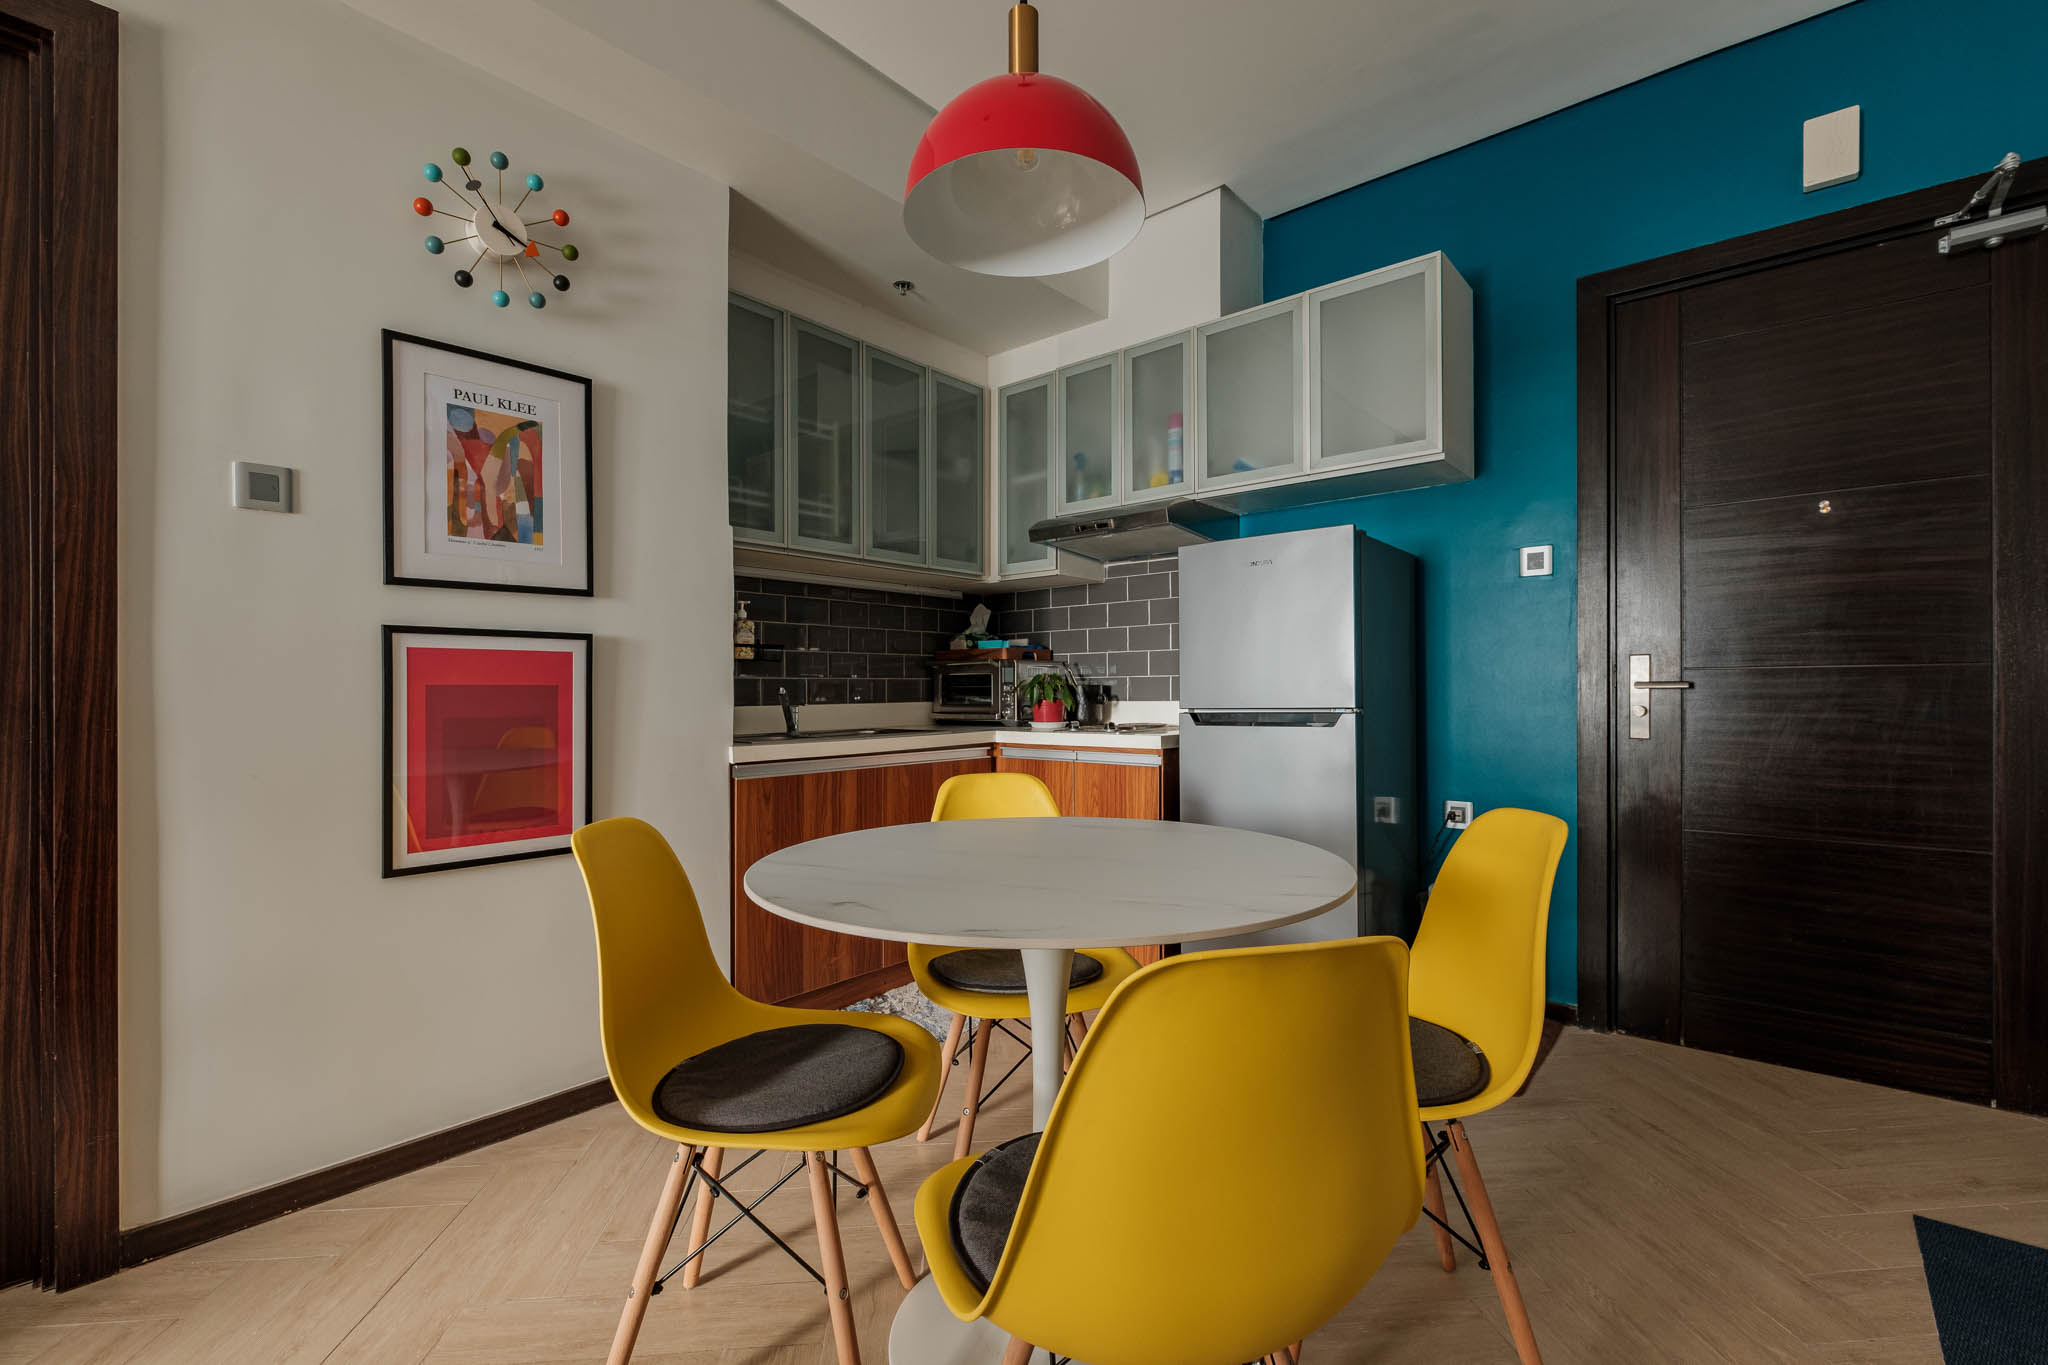 Modern apartment interior with teal accent wall, red pendant lamp, and yellow chairs beside a round dining table.